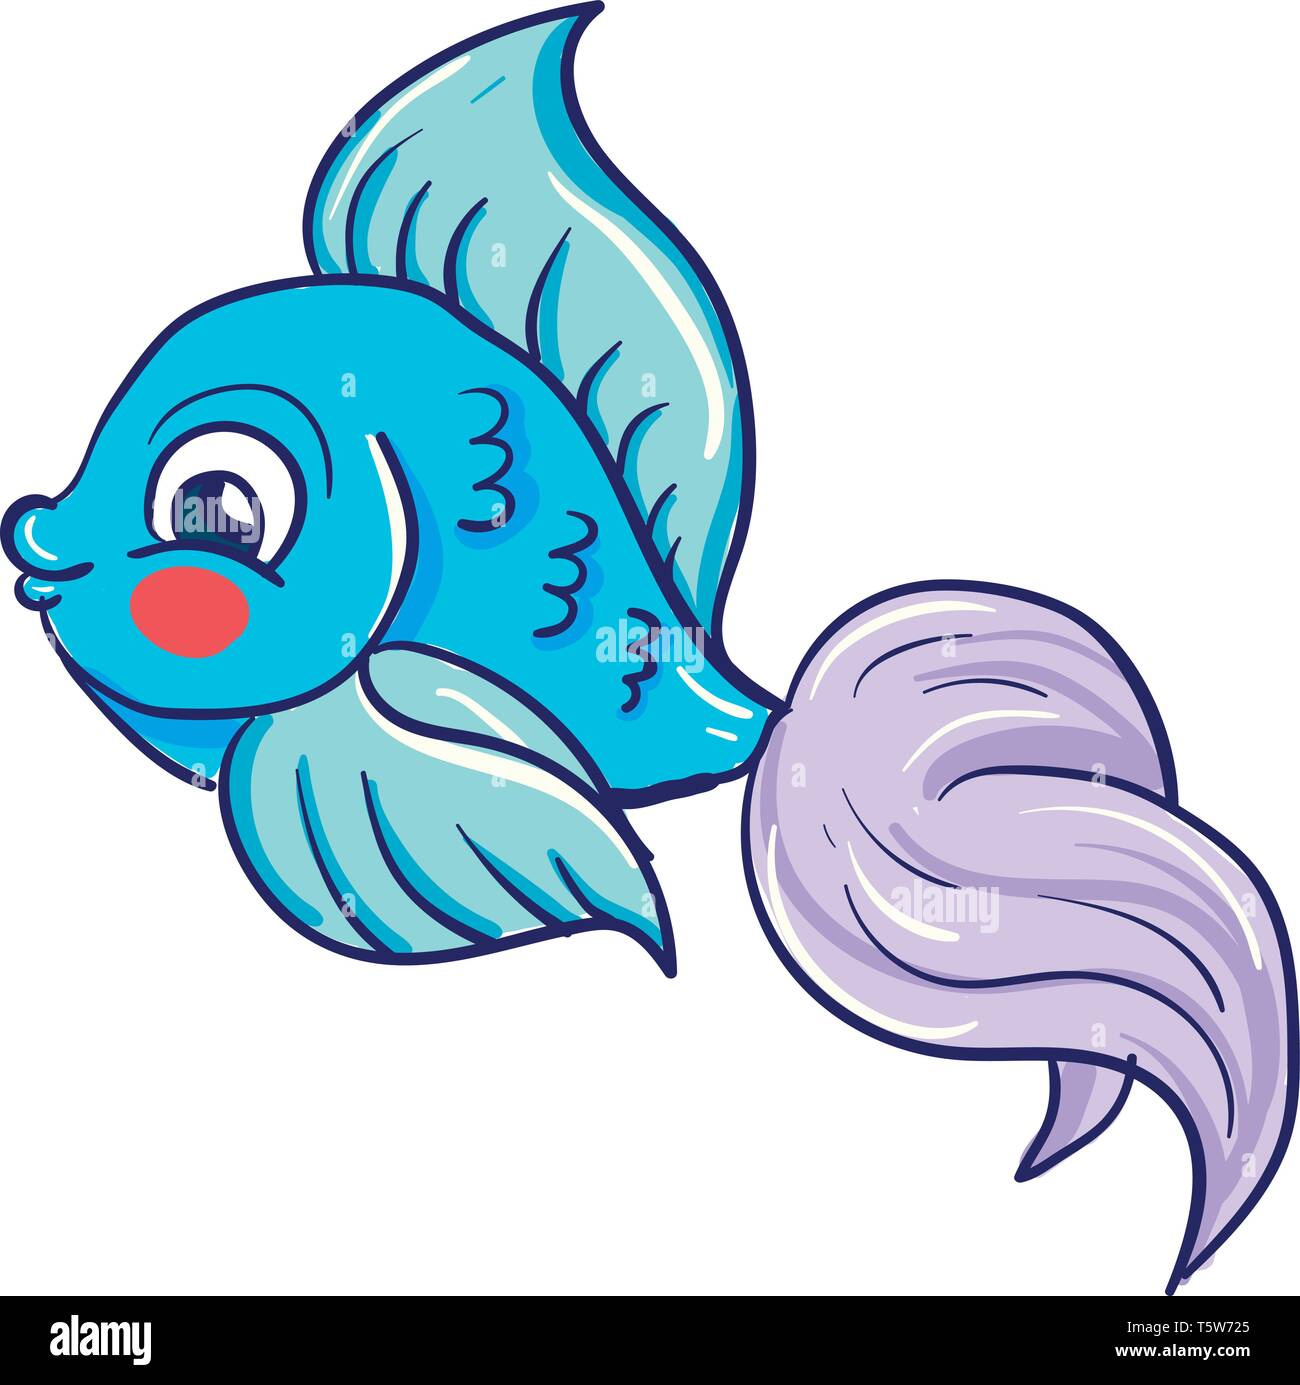 https://c8.alamy.com/comp/T5W725/a-pretty-blue-fish-with-a-lavender-tail-and-a-red-cheek-vector-color-drawing-or-illustration-T5W725.jpg